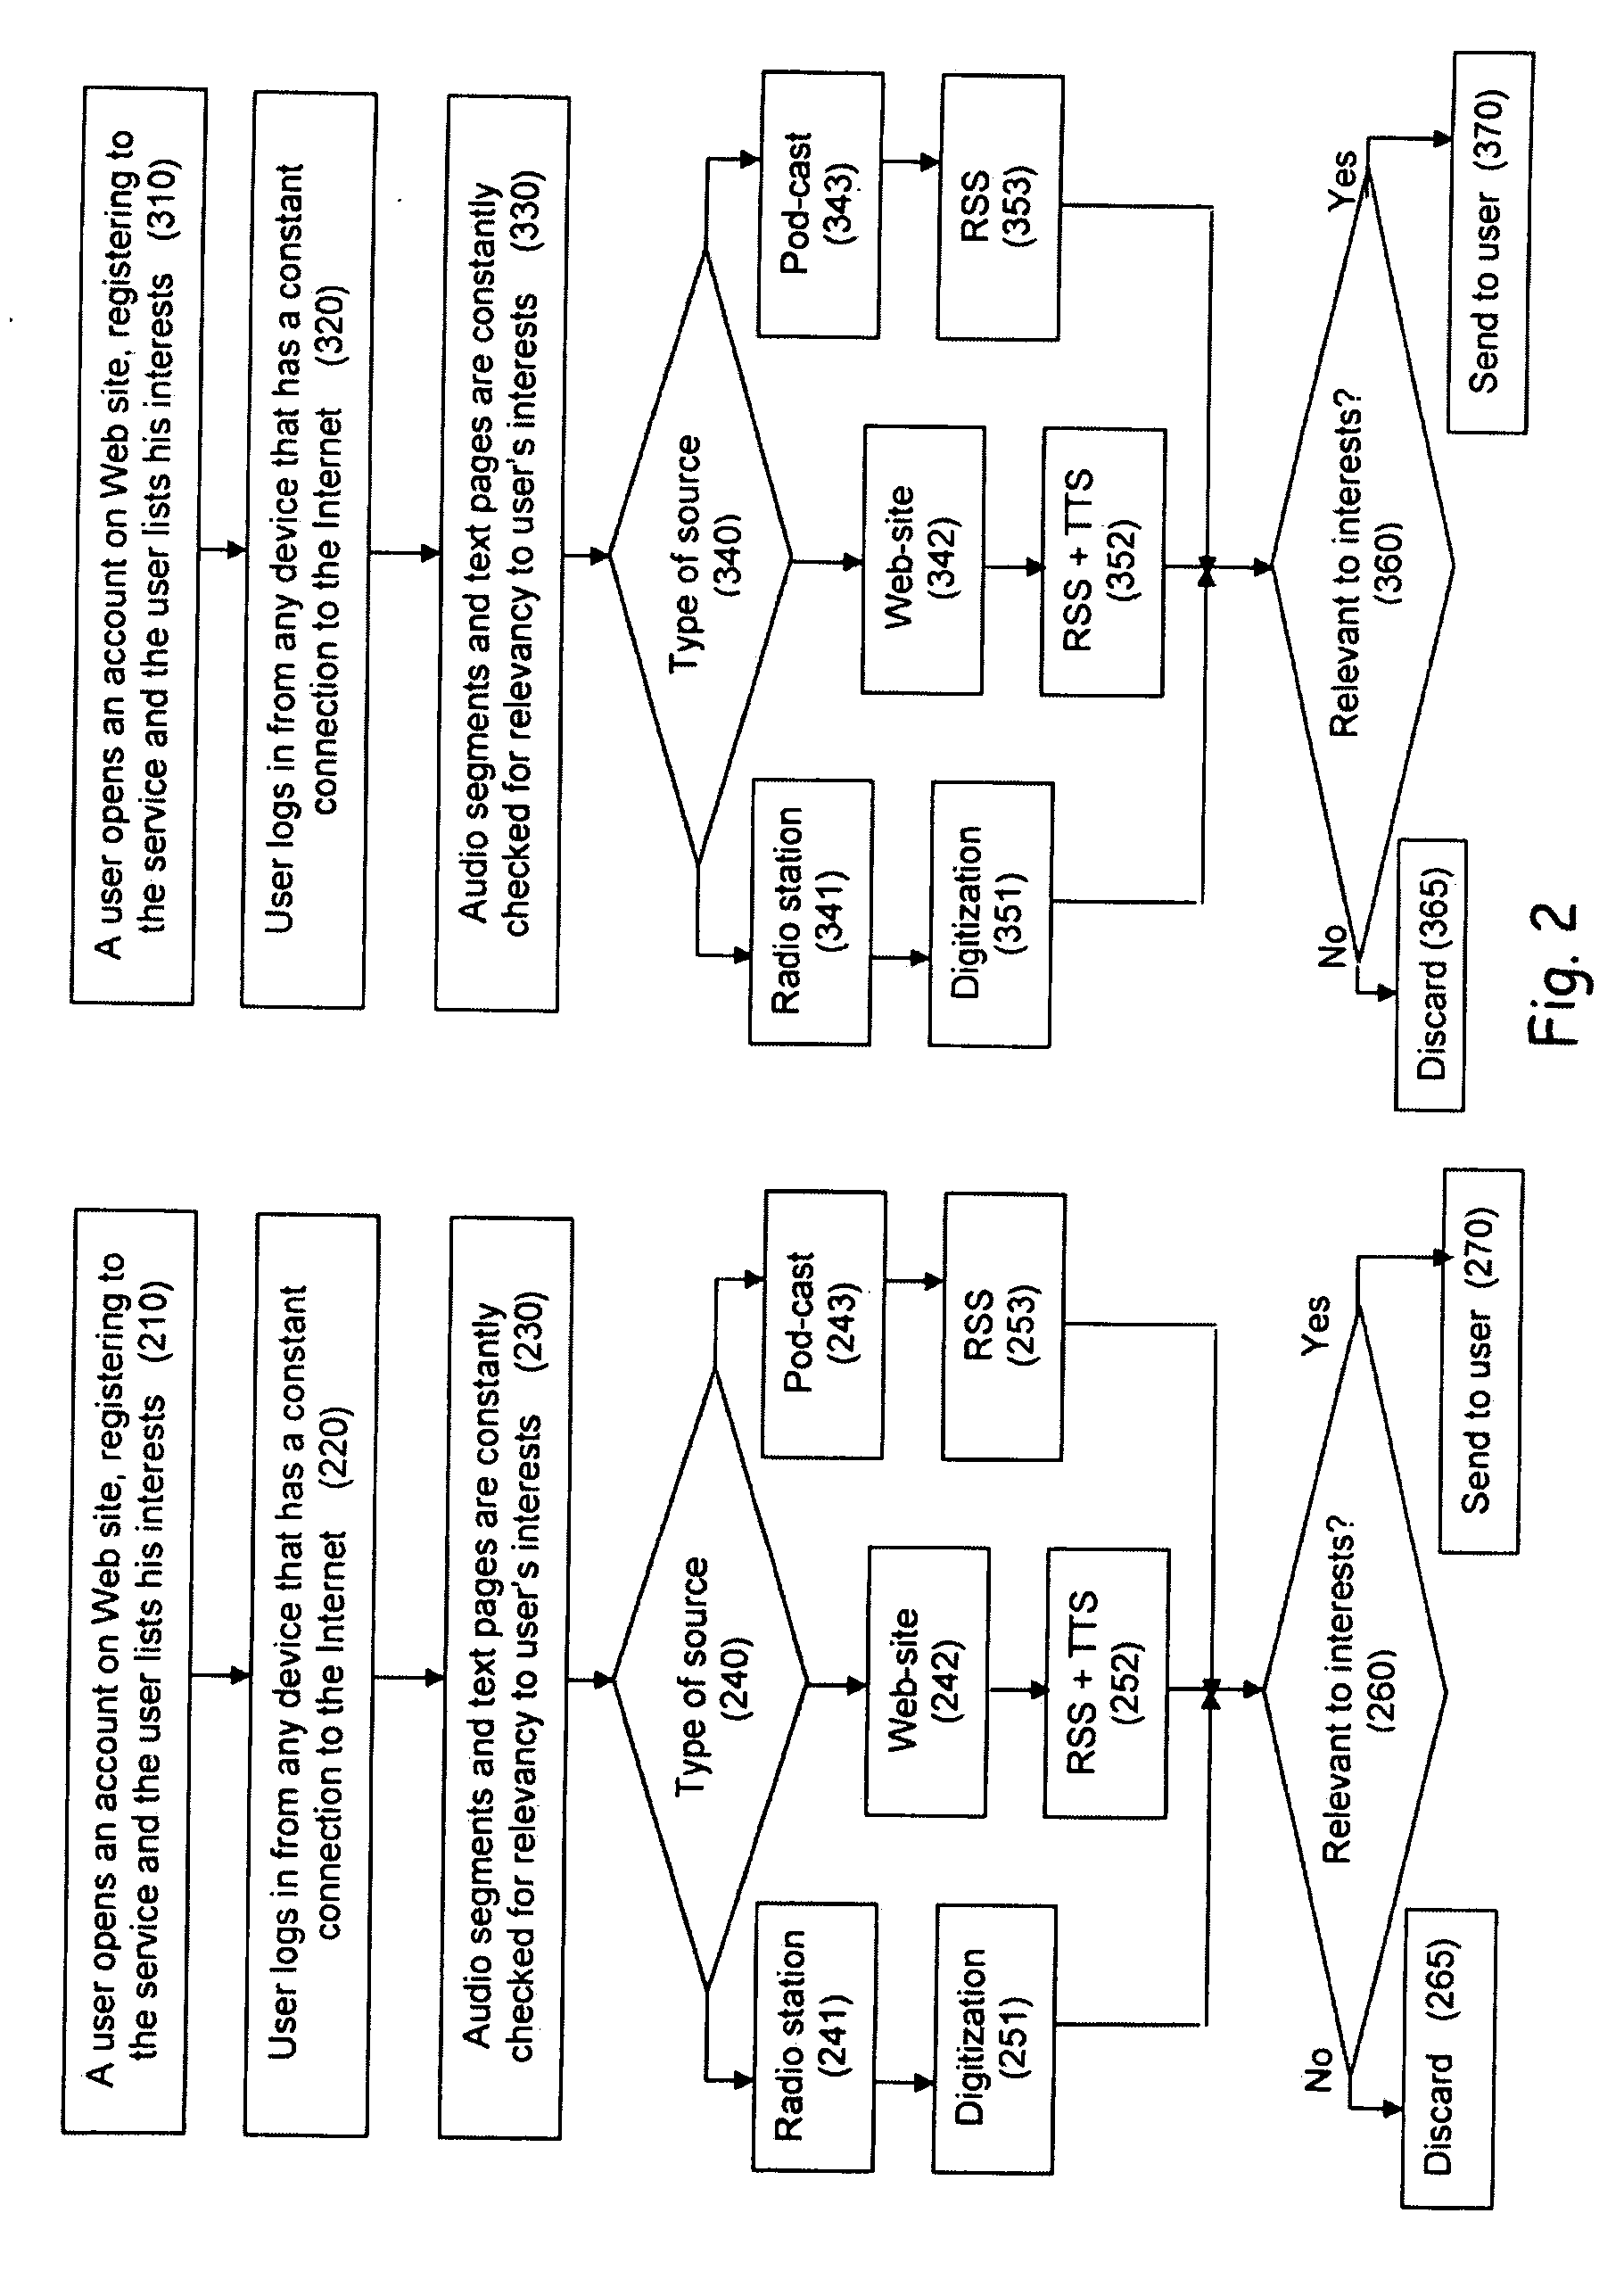 System and Method Providing Audio-on-Demand to a User's Personal Online Device as Part of an Online Audio Community